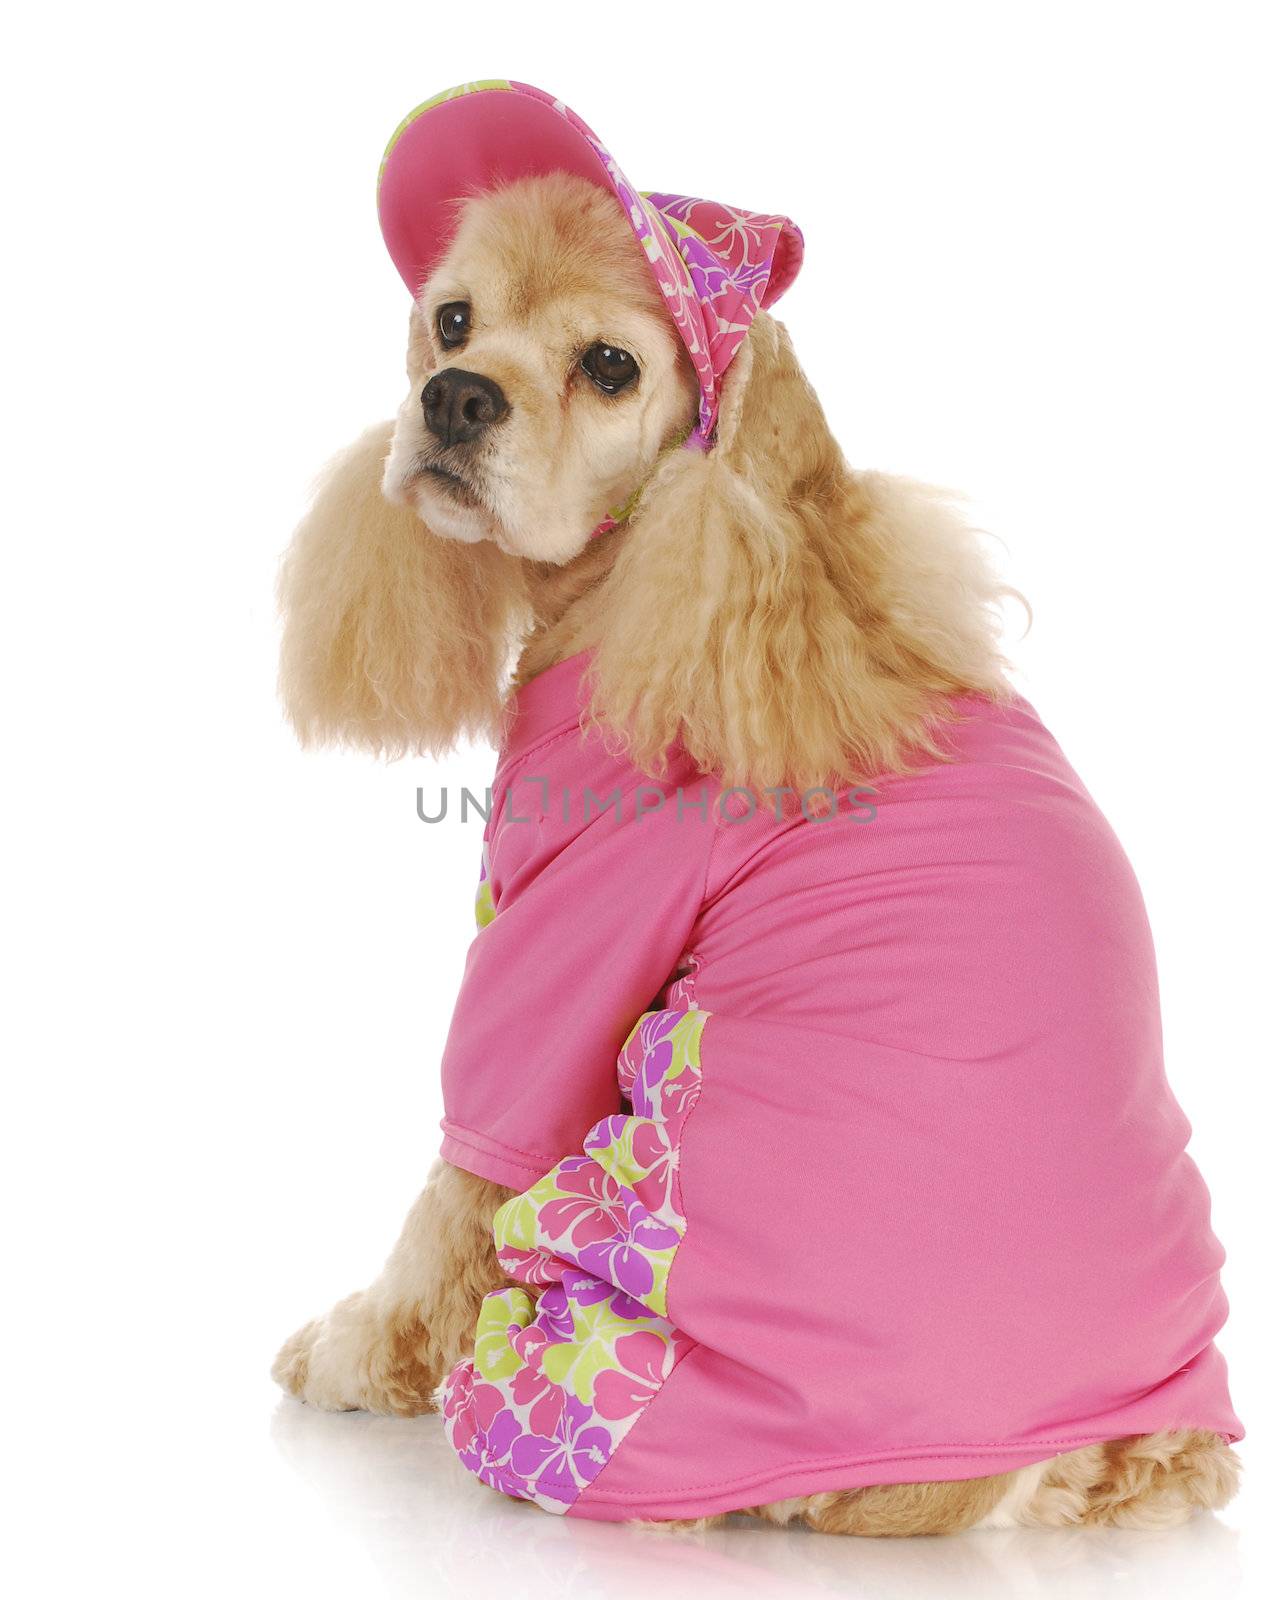 female dog - cute cocker spaniel wearing pink hat and shirt - 9 years old